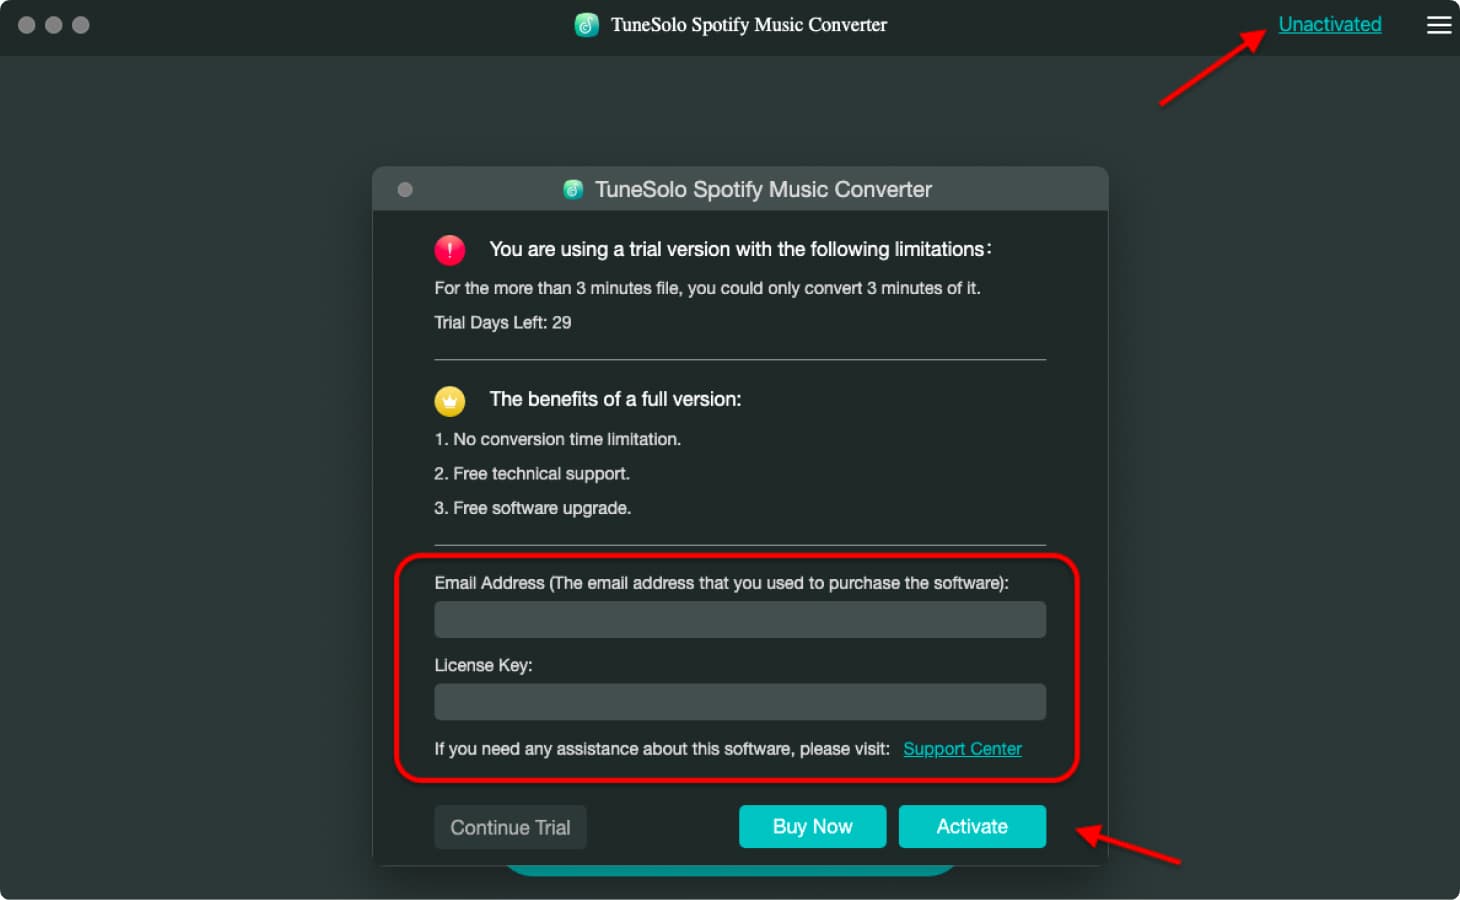 How to Activate Tunesolo Spotify Music Converter